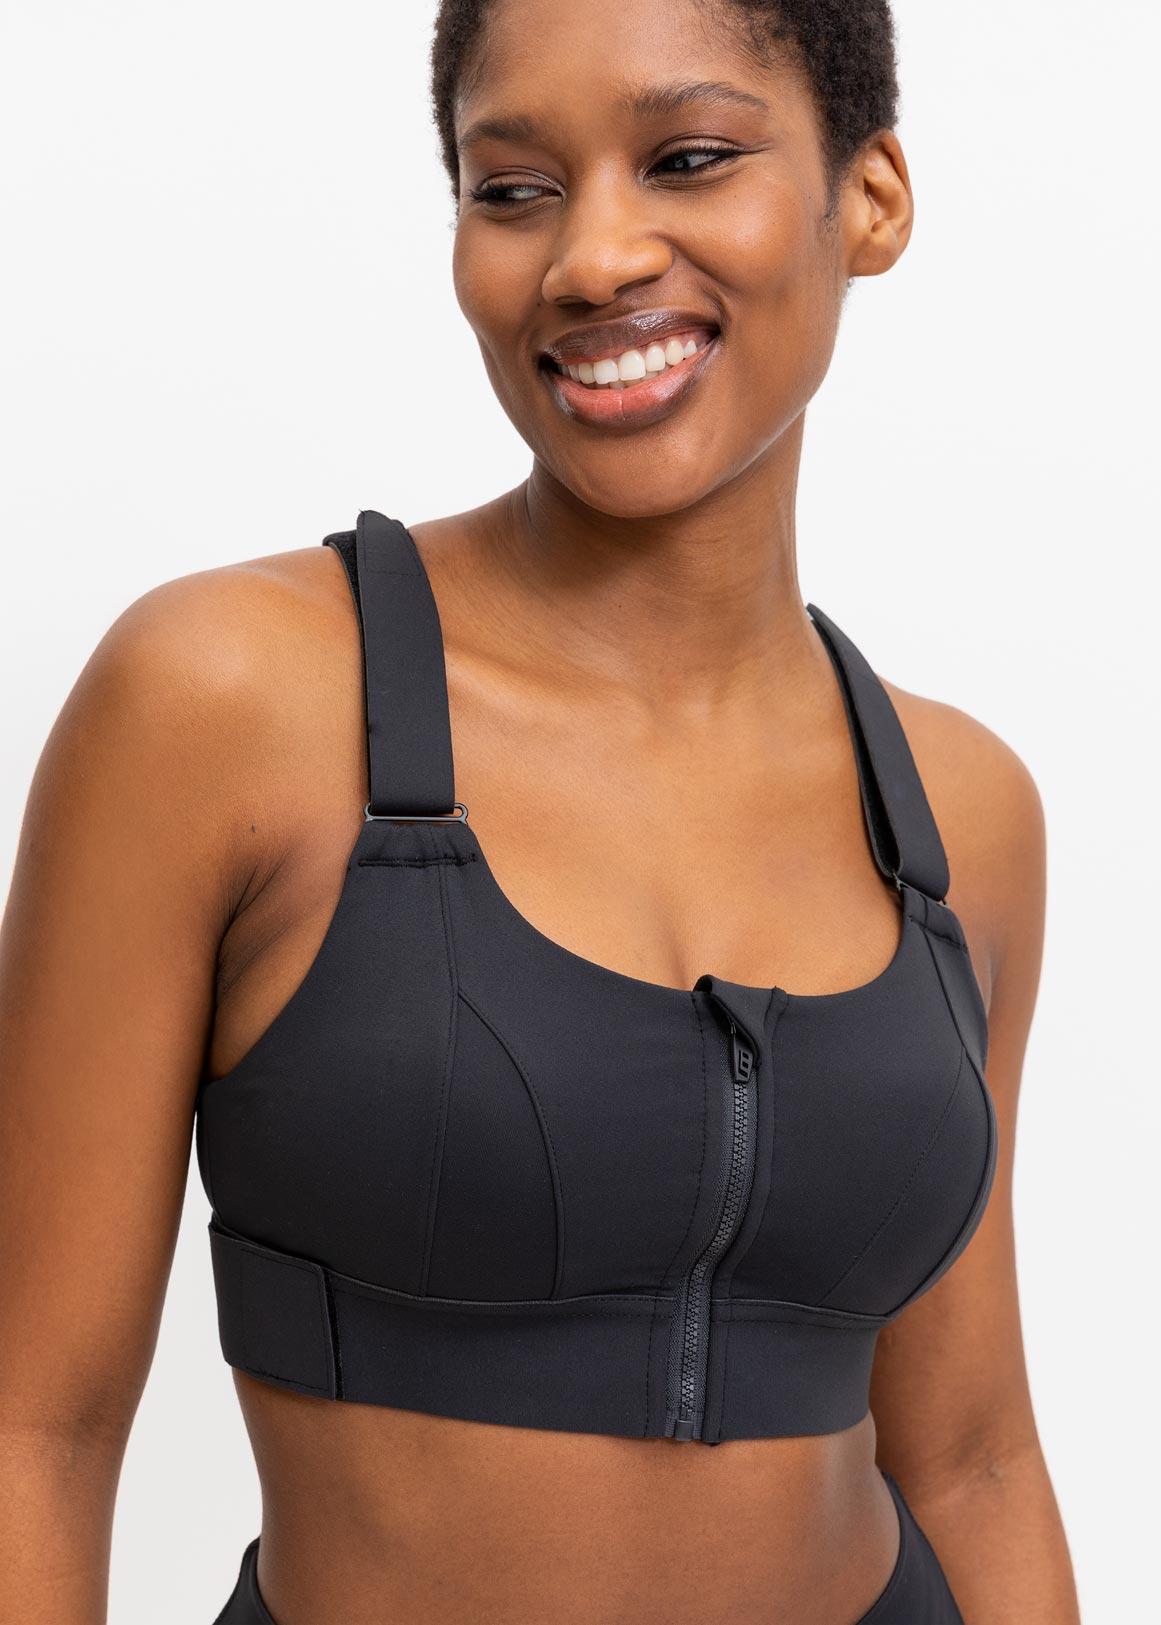 Butter Sports Bra with Adjustable Straps